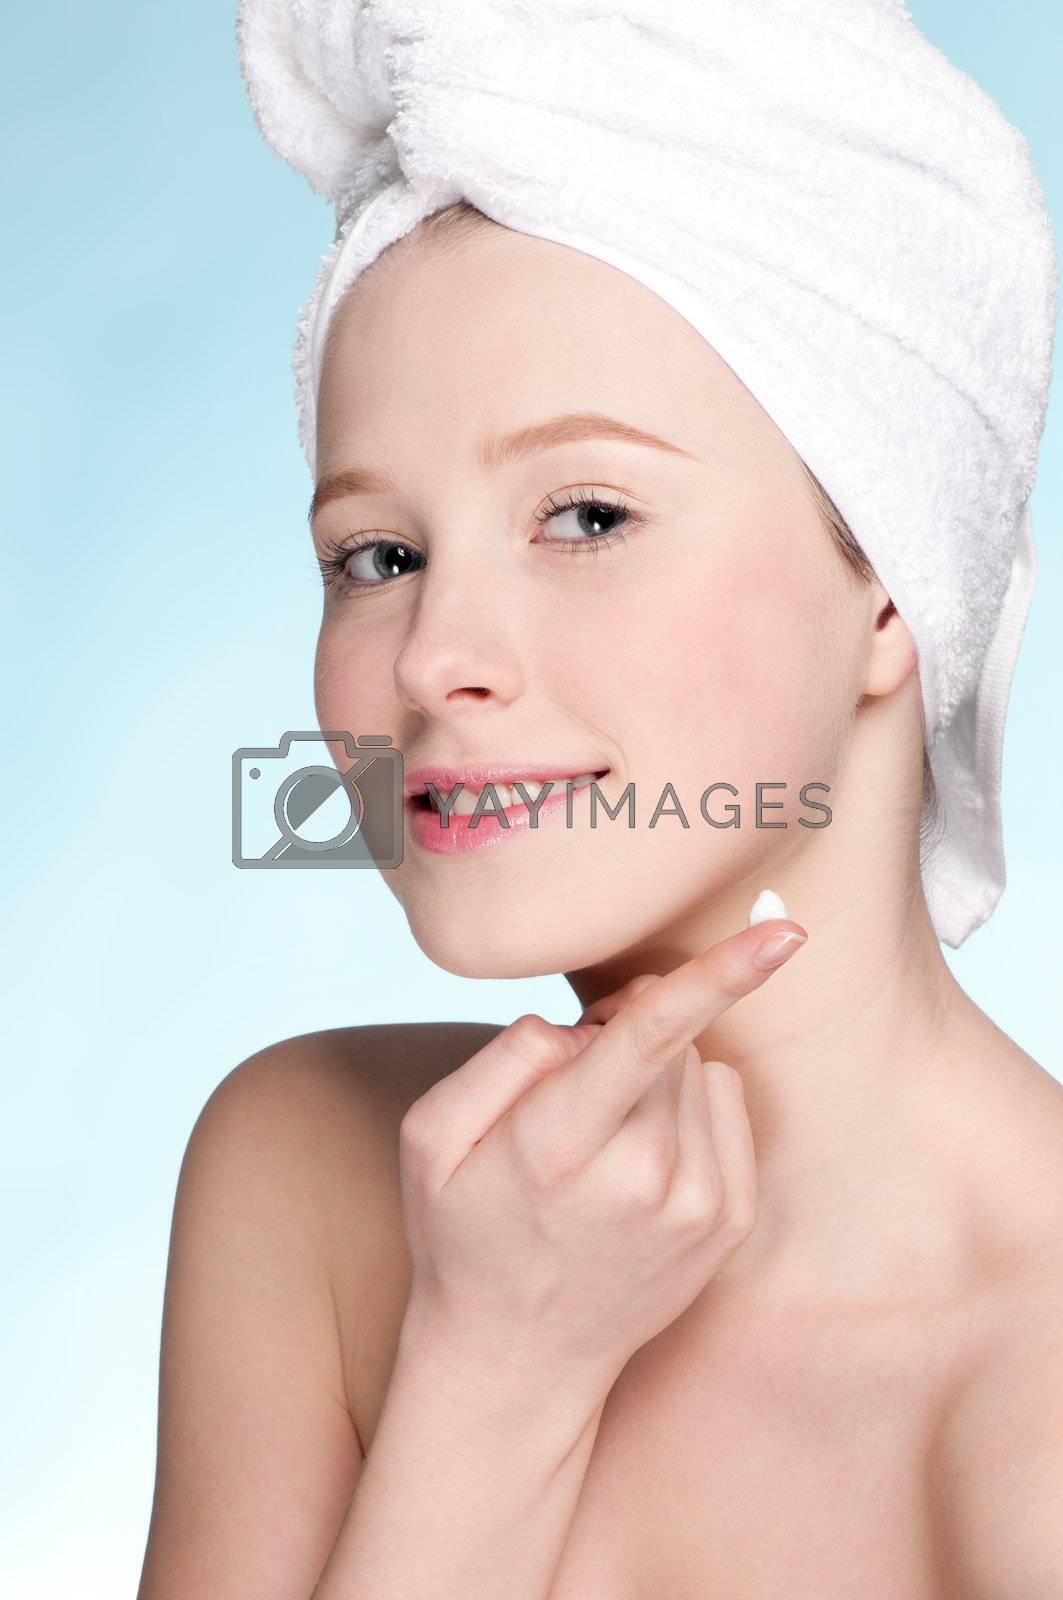 Royalty free image of Beautiful woman applying moisturizer cream on face by markin